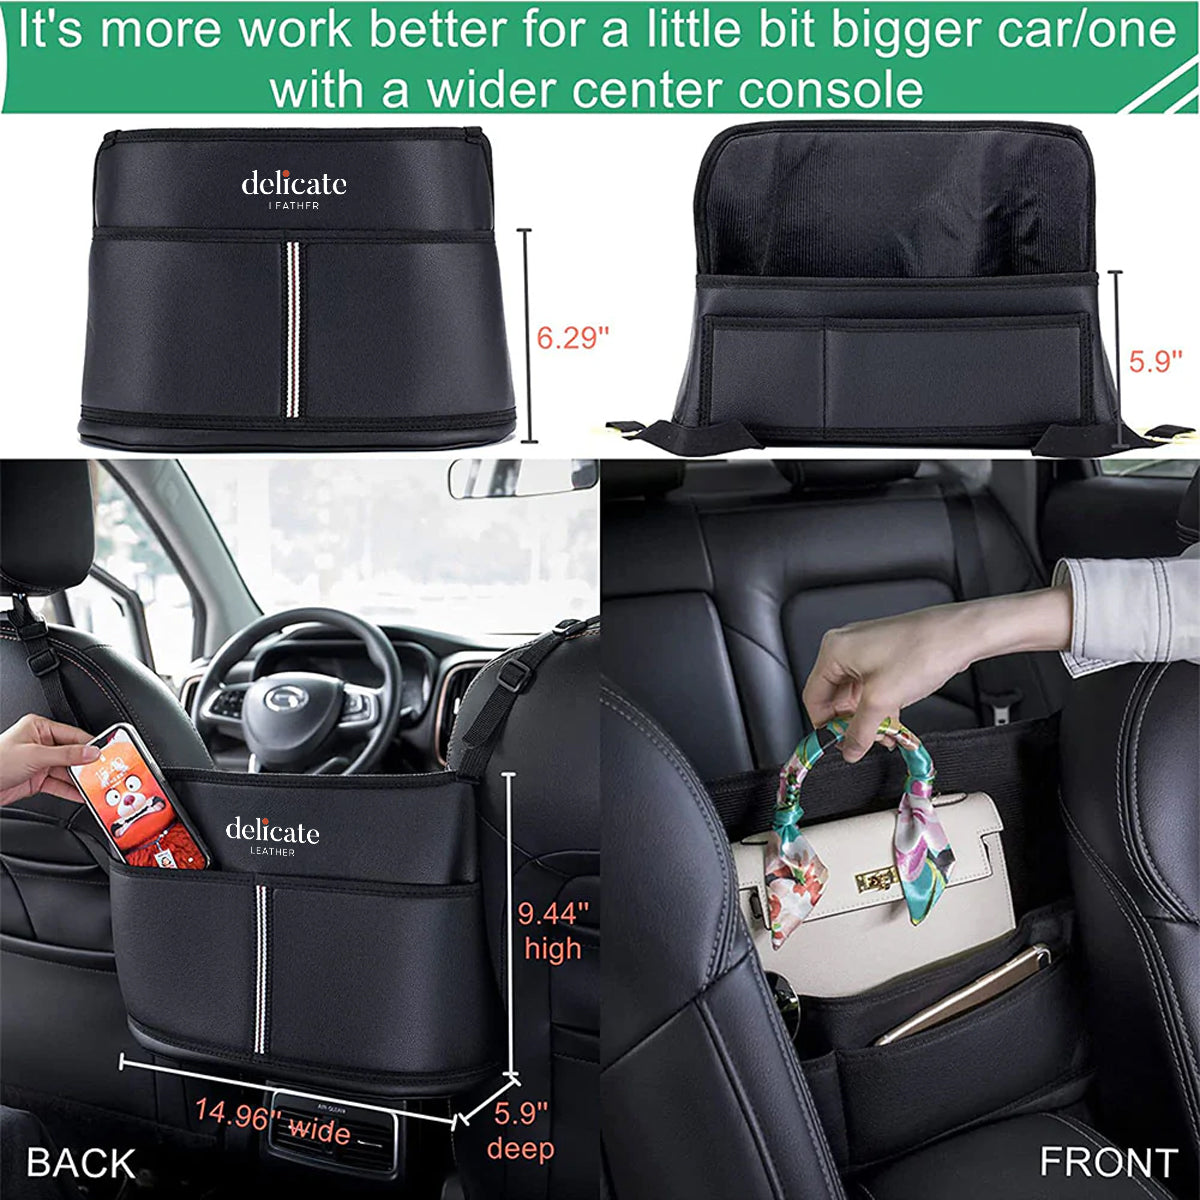 Delicate Leather Car Purse Holder for Car Handbag Holder Between Seats Premium PU Leather, Custom For Your Cars, Auto Driver Or Passenger Accessories Organizer, Hanging Car Purse Storage Pocket Back Seat Pet Barrier WQ11991 - Delicate Leather